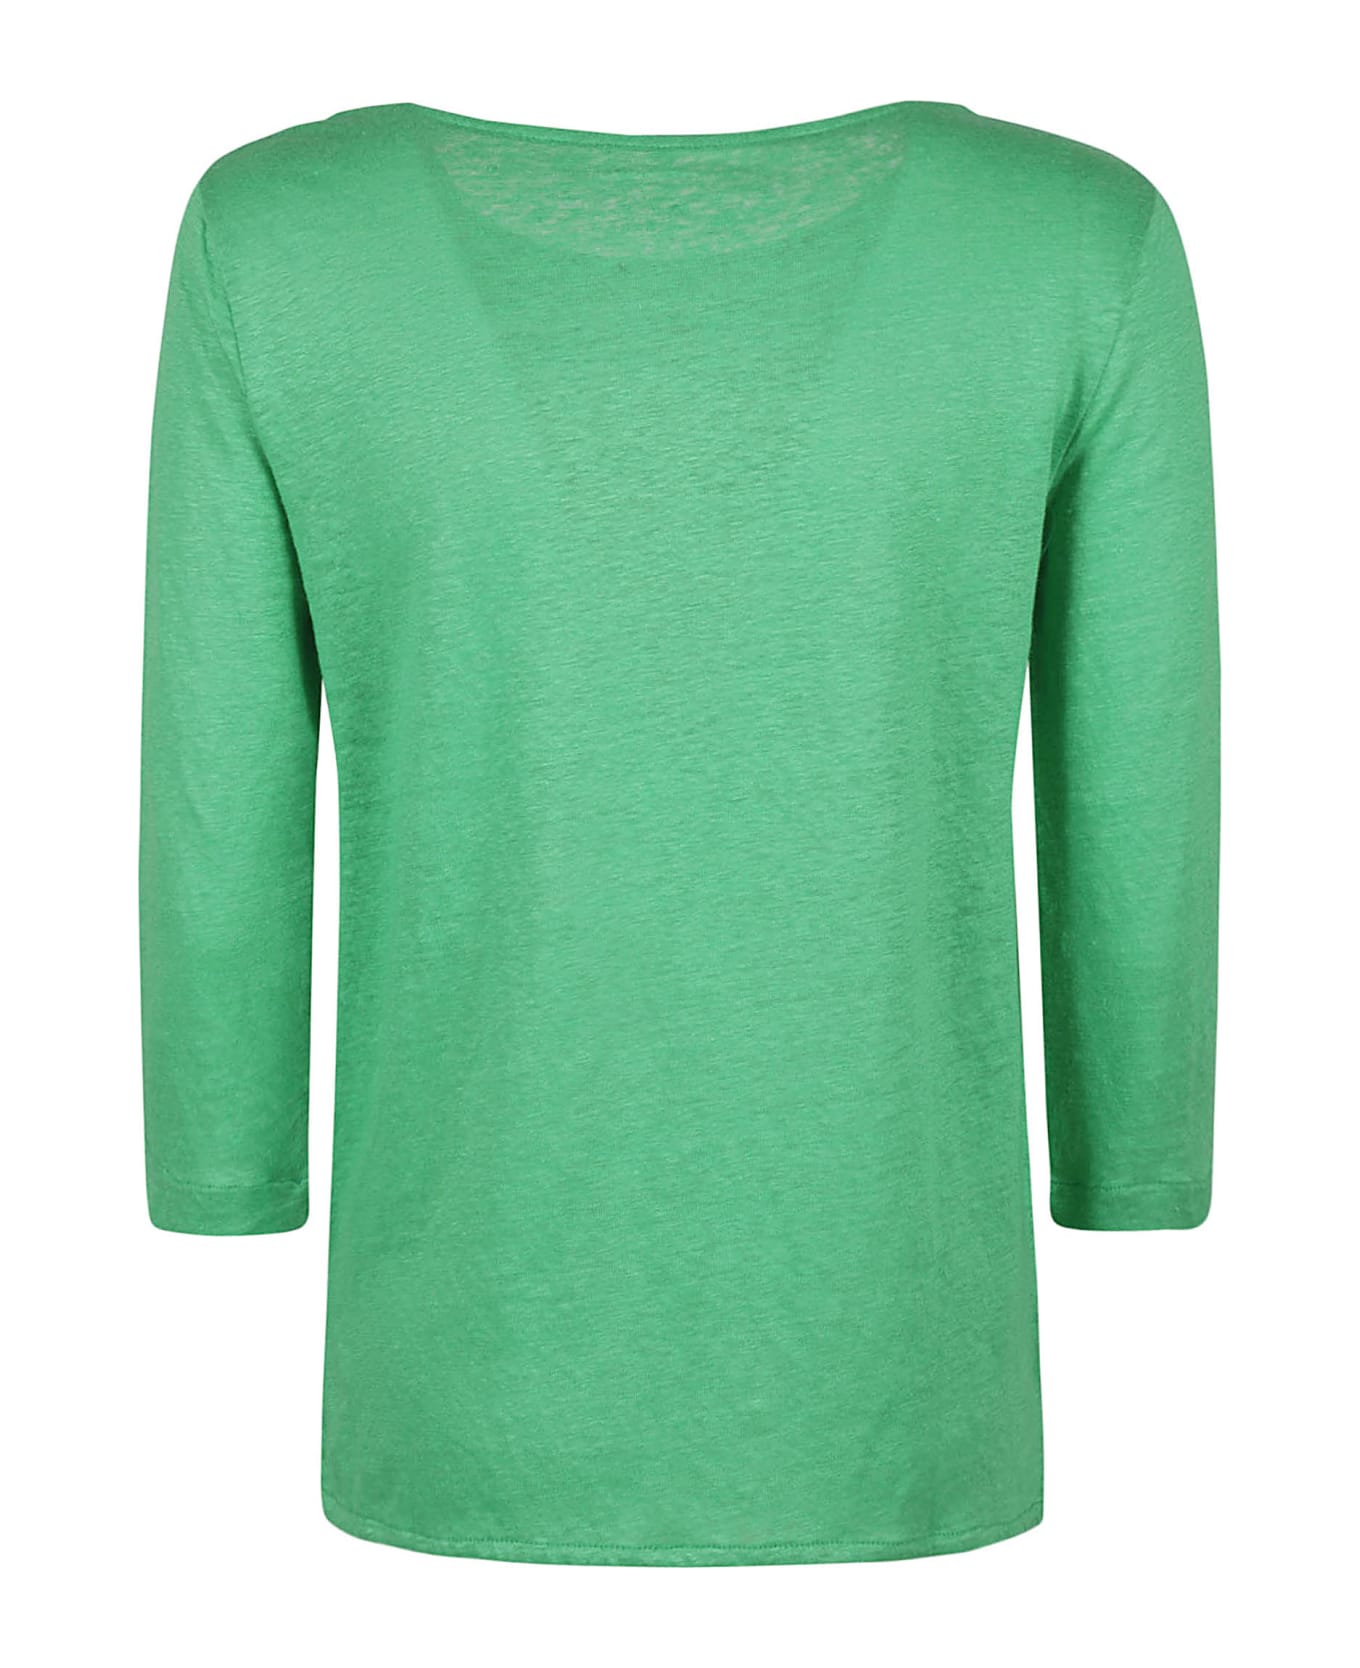 Majestic Filatures Majestic T-shirts And Polos Green - Green